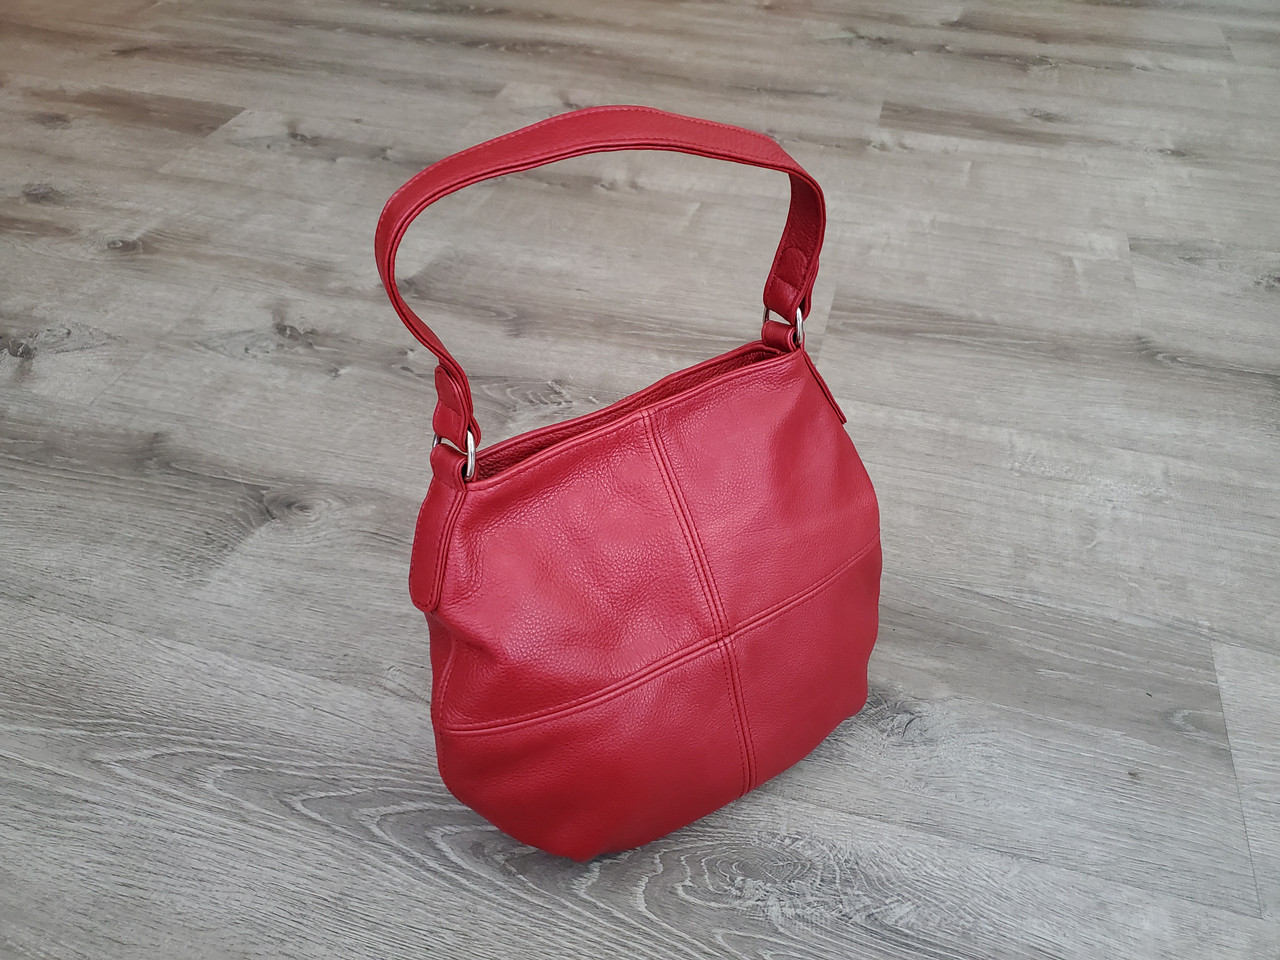 All Day Leather Tote, Handmade Genuine Leather